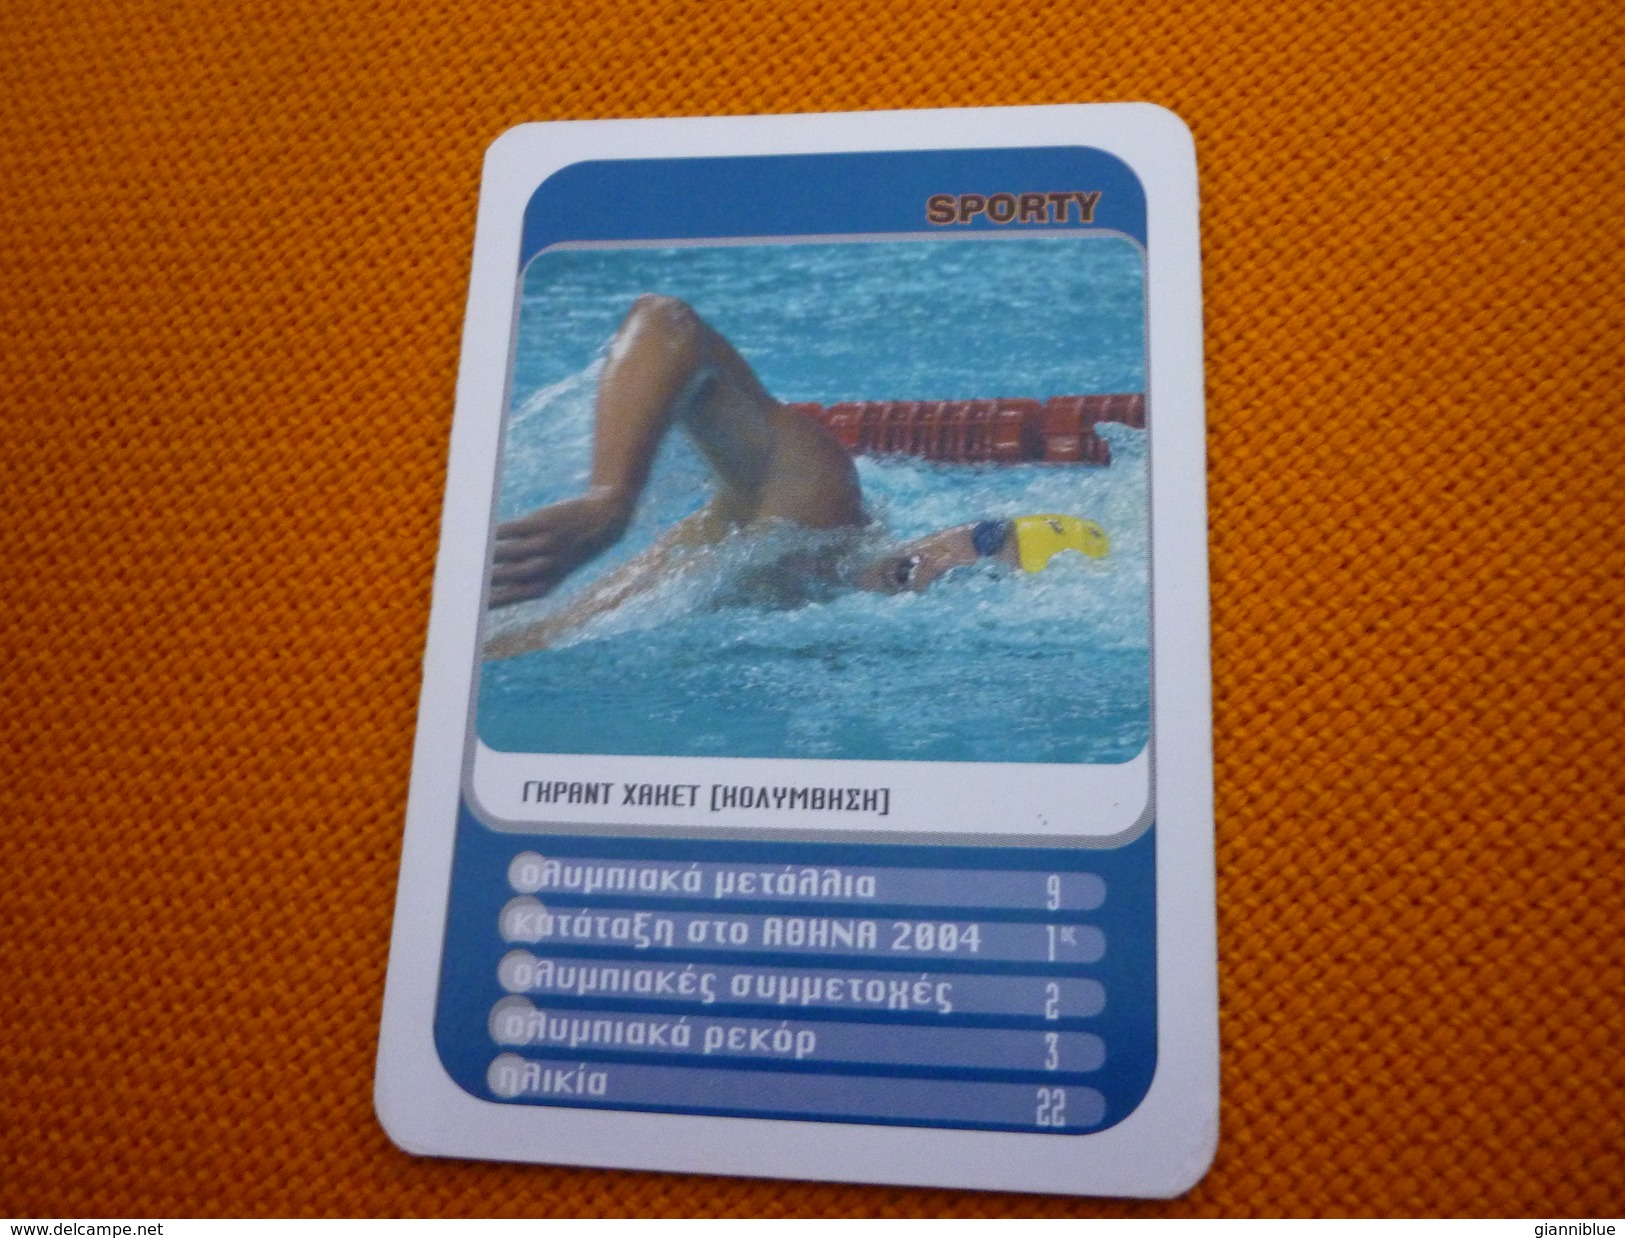 Grant Hackett Australian Swimmer Swimming Athens 2004 Olympic Games Medalist Greece Greek Trading Card - Trading Cards